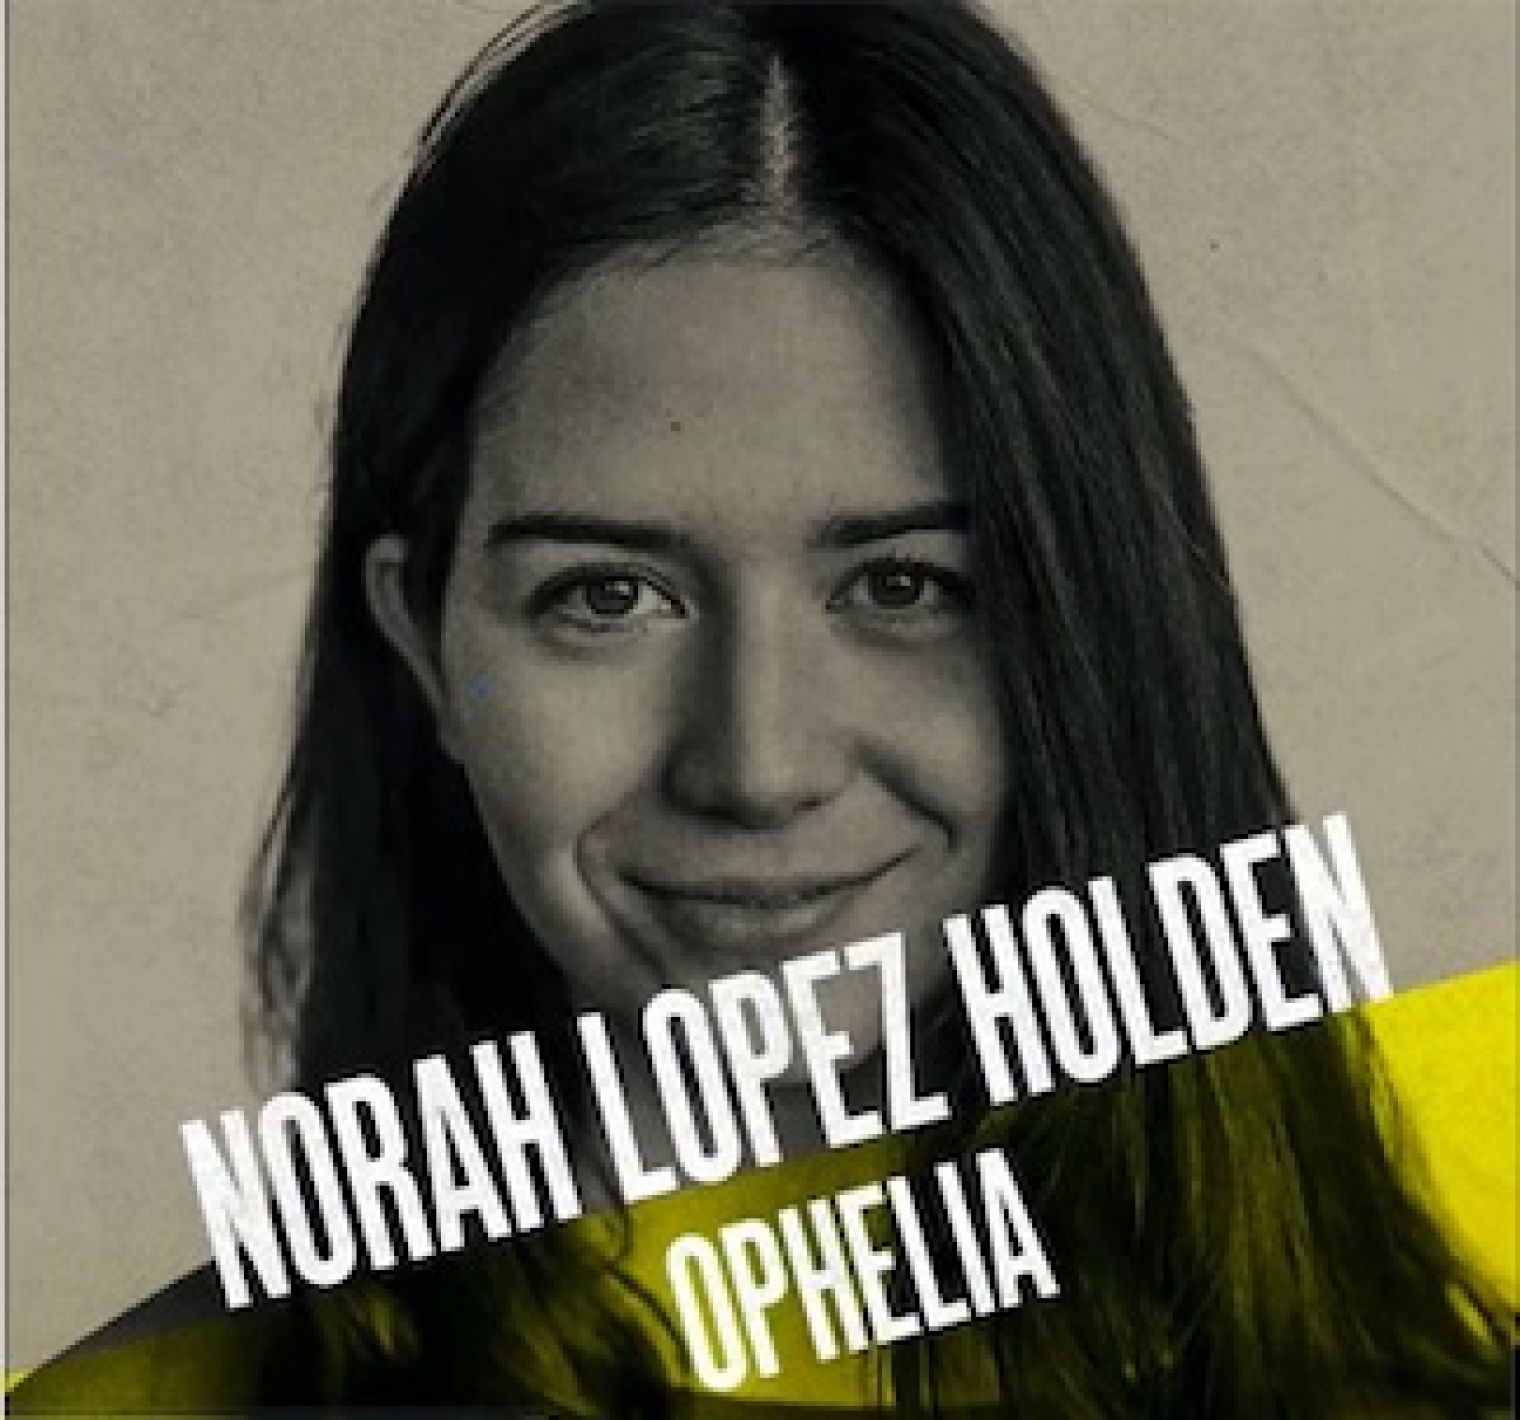 Casting just announced; Norah Lopez Holden will play Ophelia opposite Cush Jumbo in 'a new kind of Hamlet' at the Young Vic.